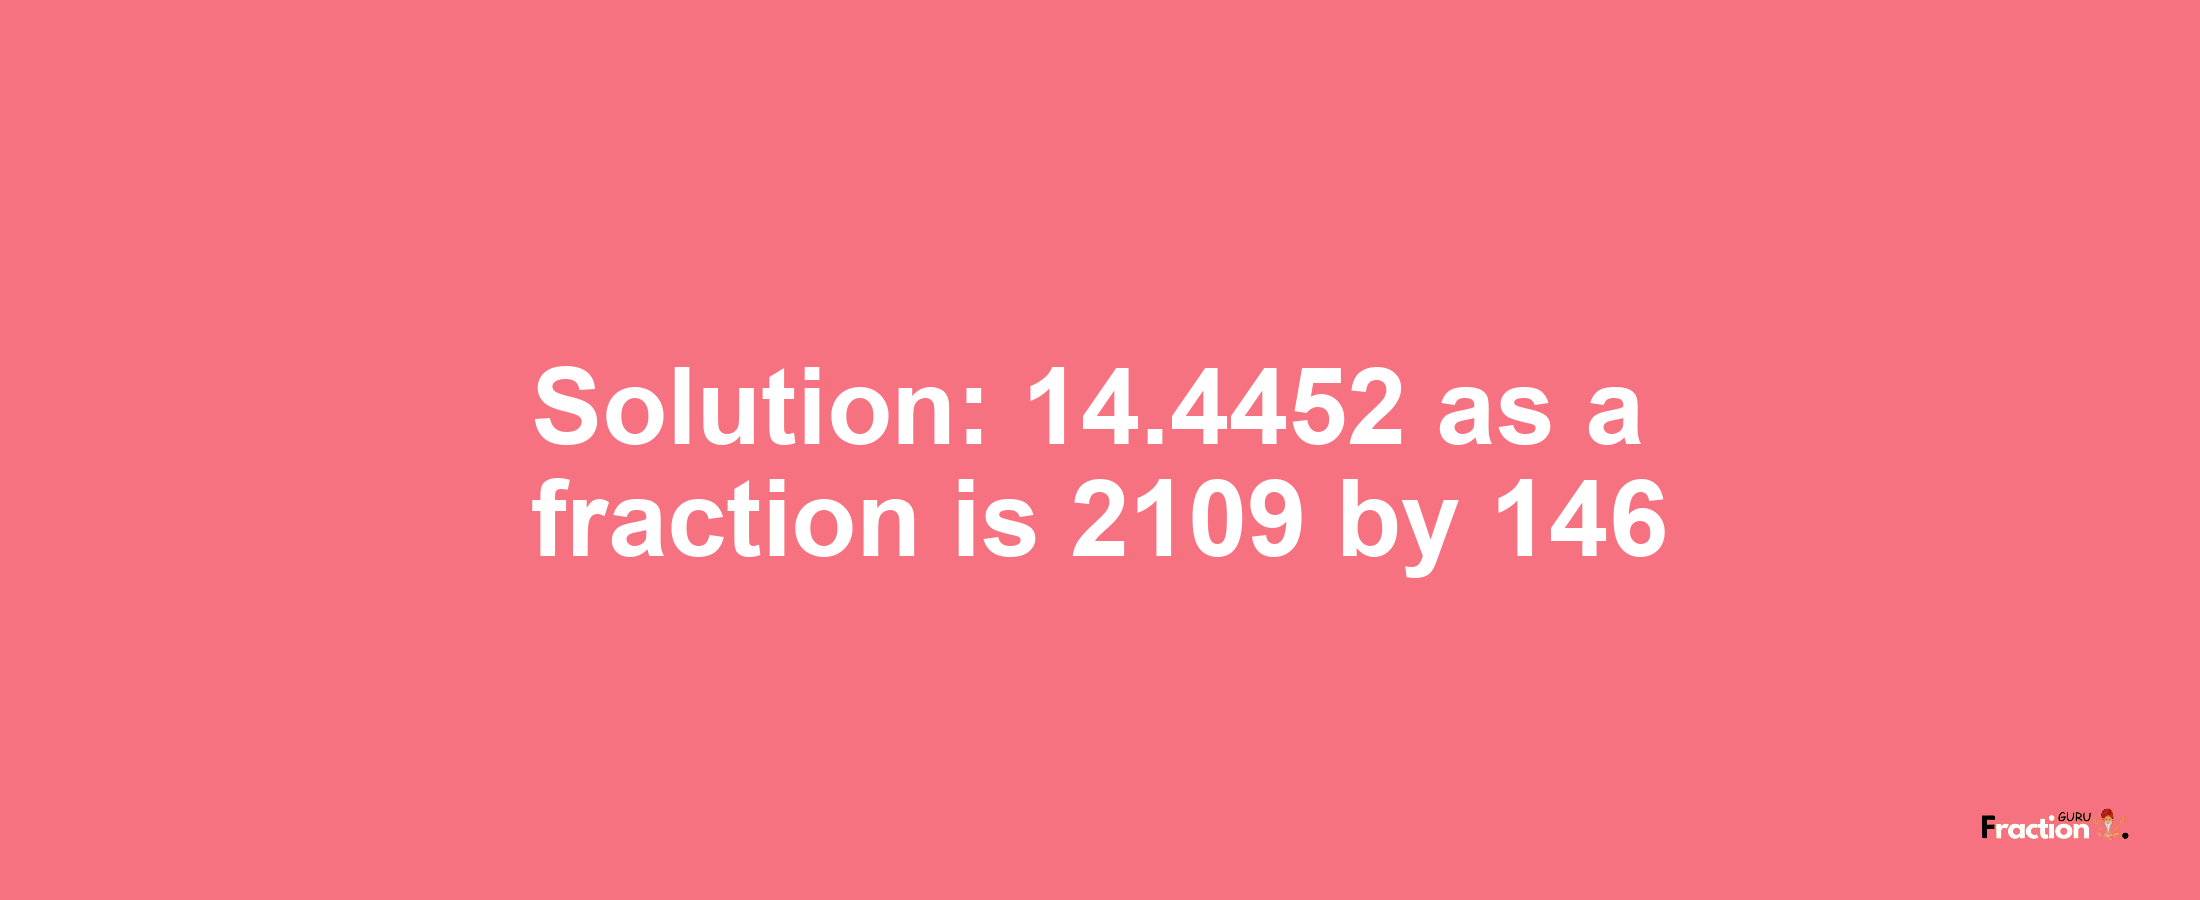 Solution:14.4452 as a fraction is 2109/146